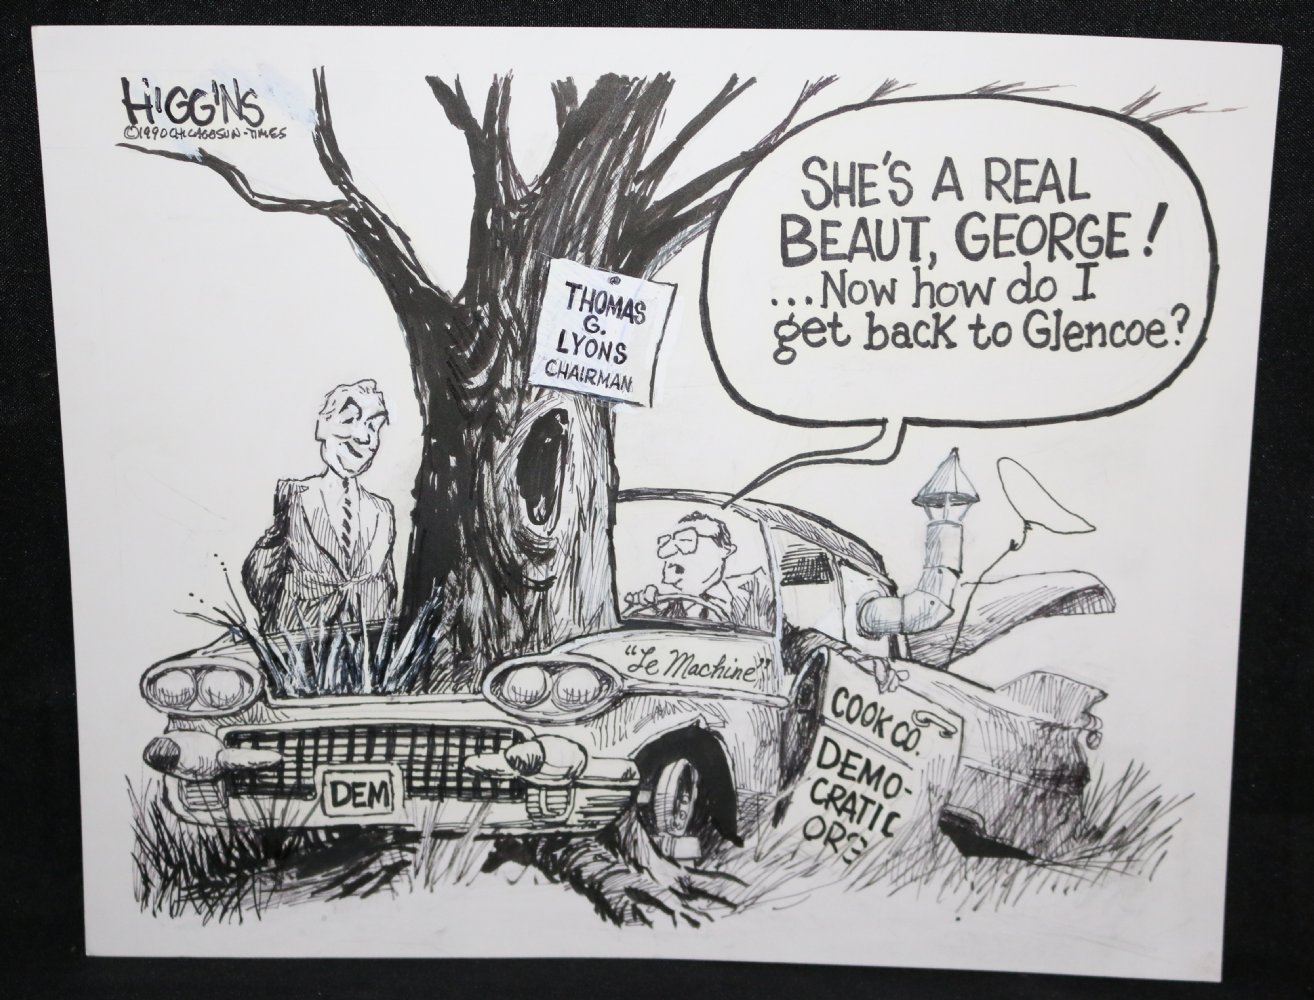 Thomas G. Lyons Chairman Car in Tree Chicago Sun-Times Newspaper Cartoon -  1990 Signed by Jack Higgins